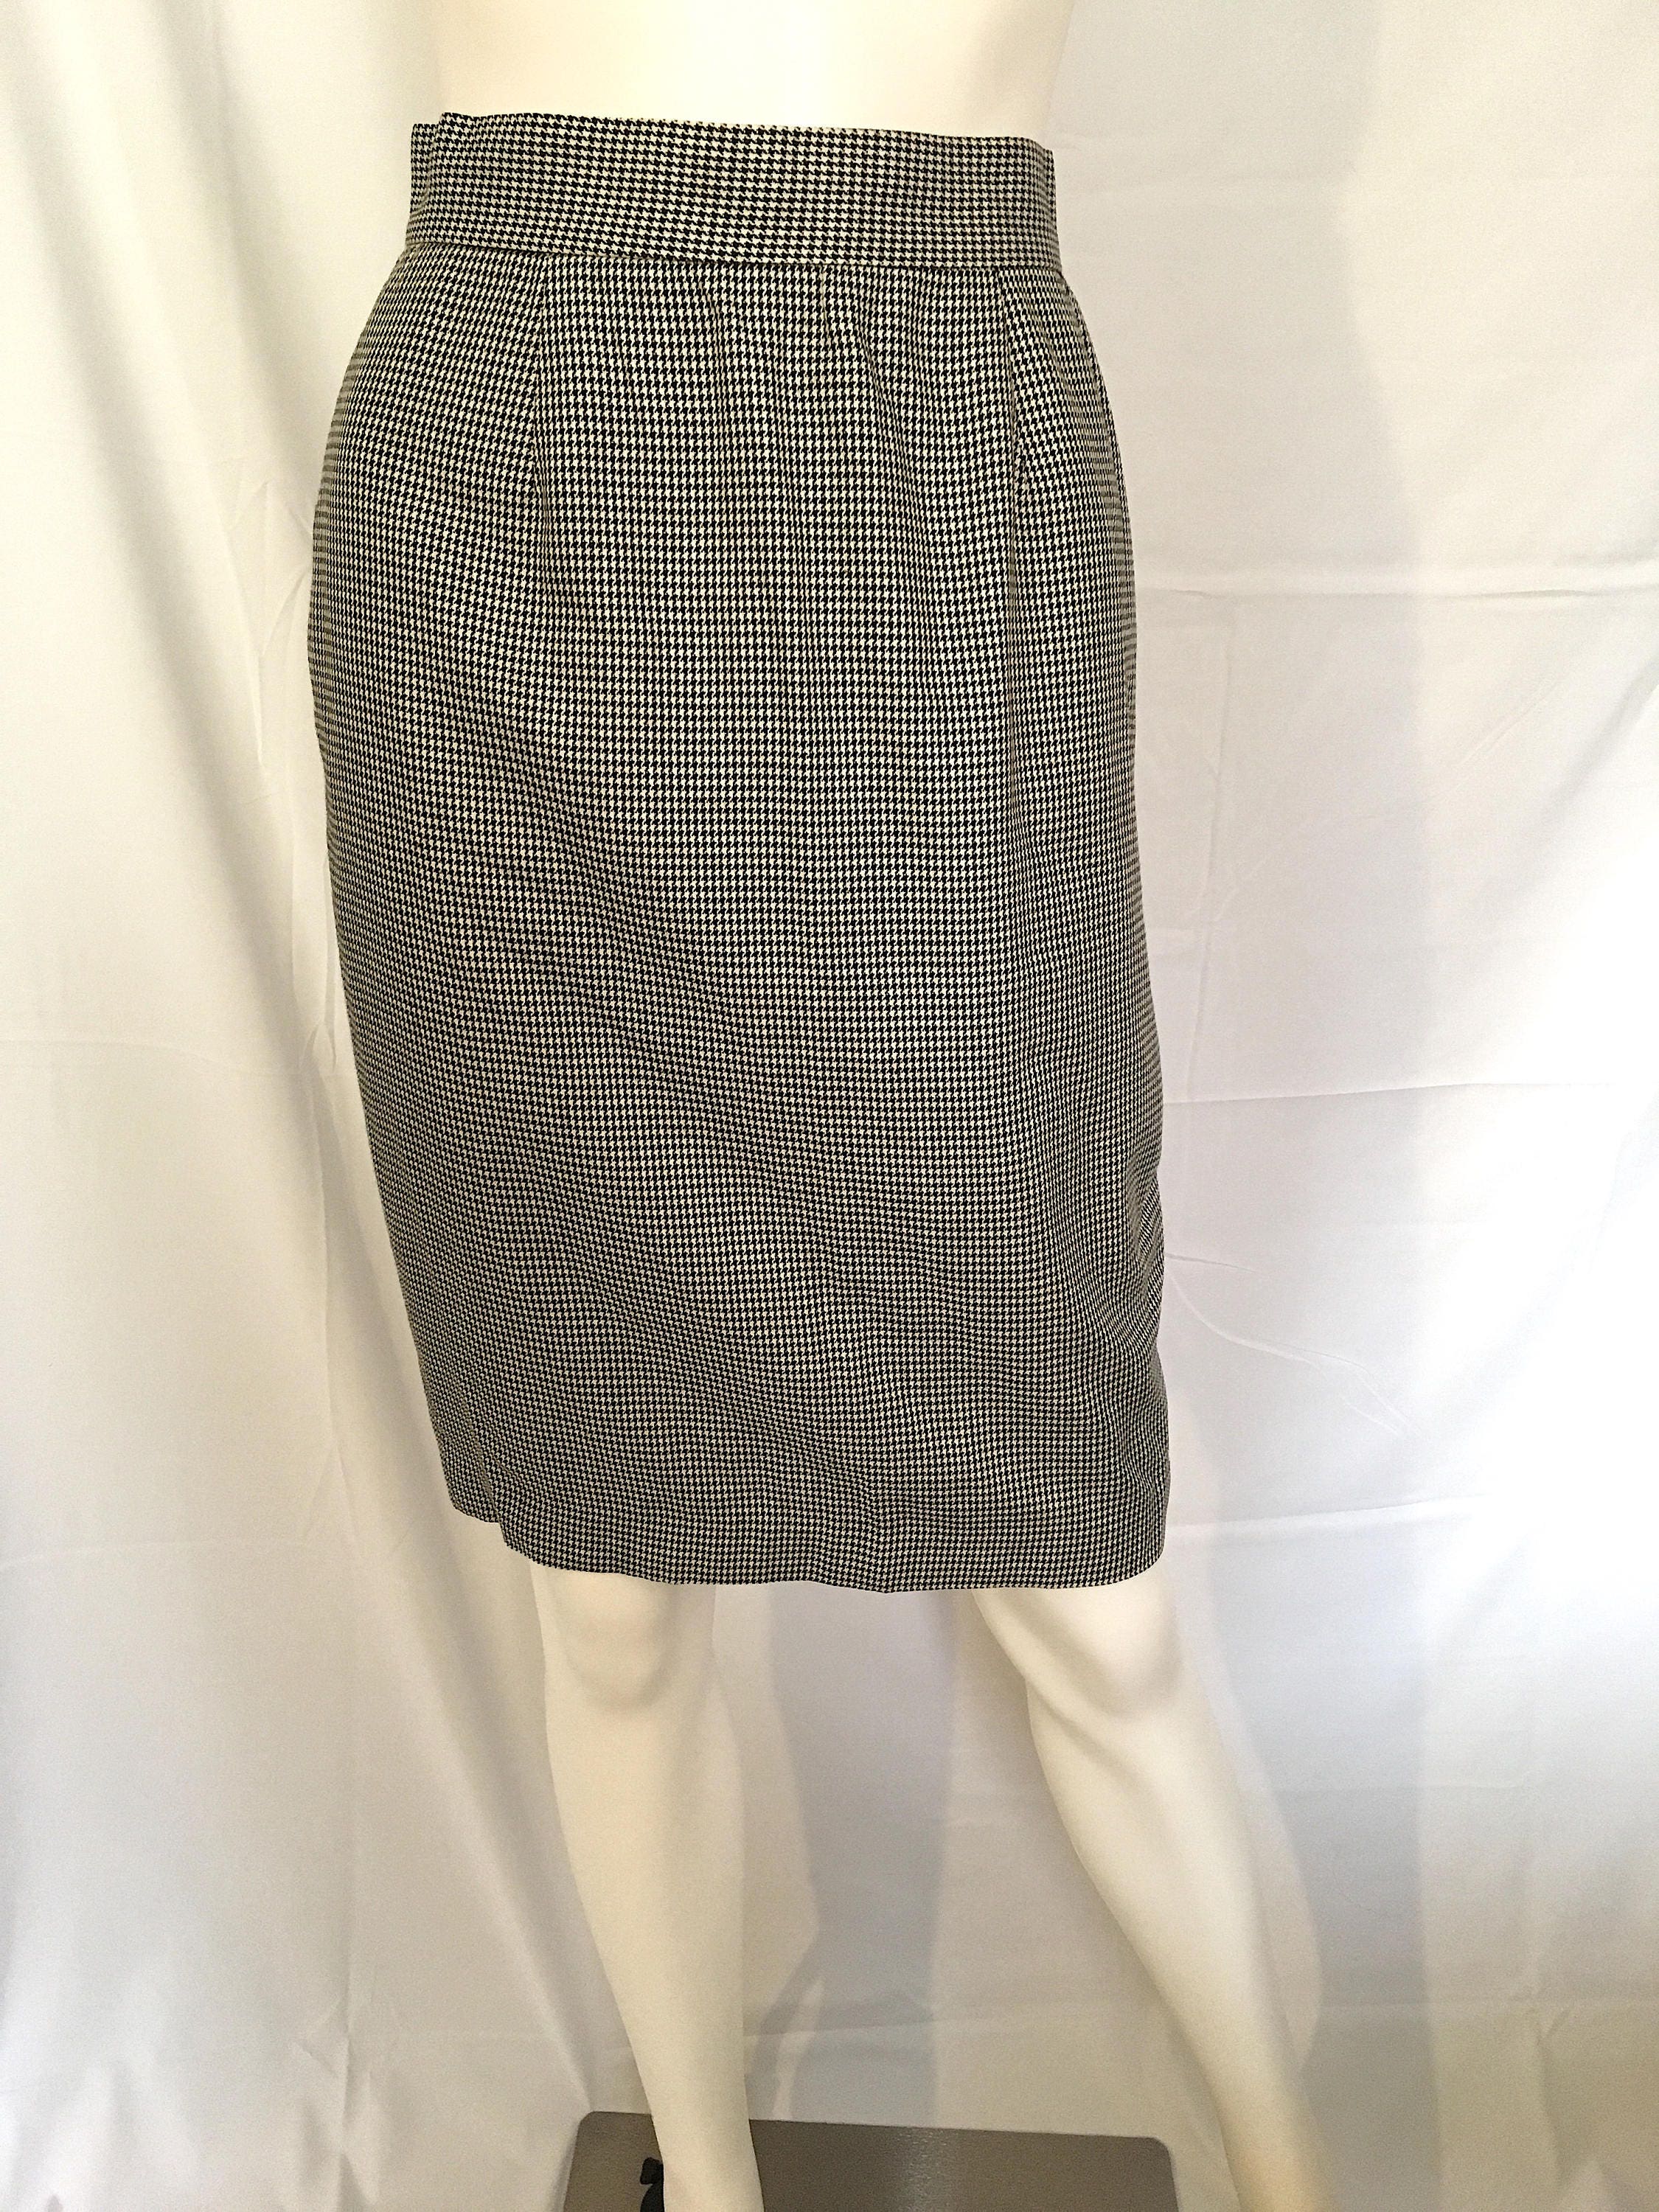 Vintage 80's Houndstooth Pencil Skirt - Etsy